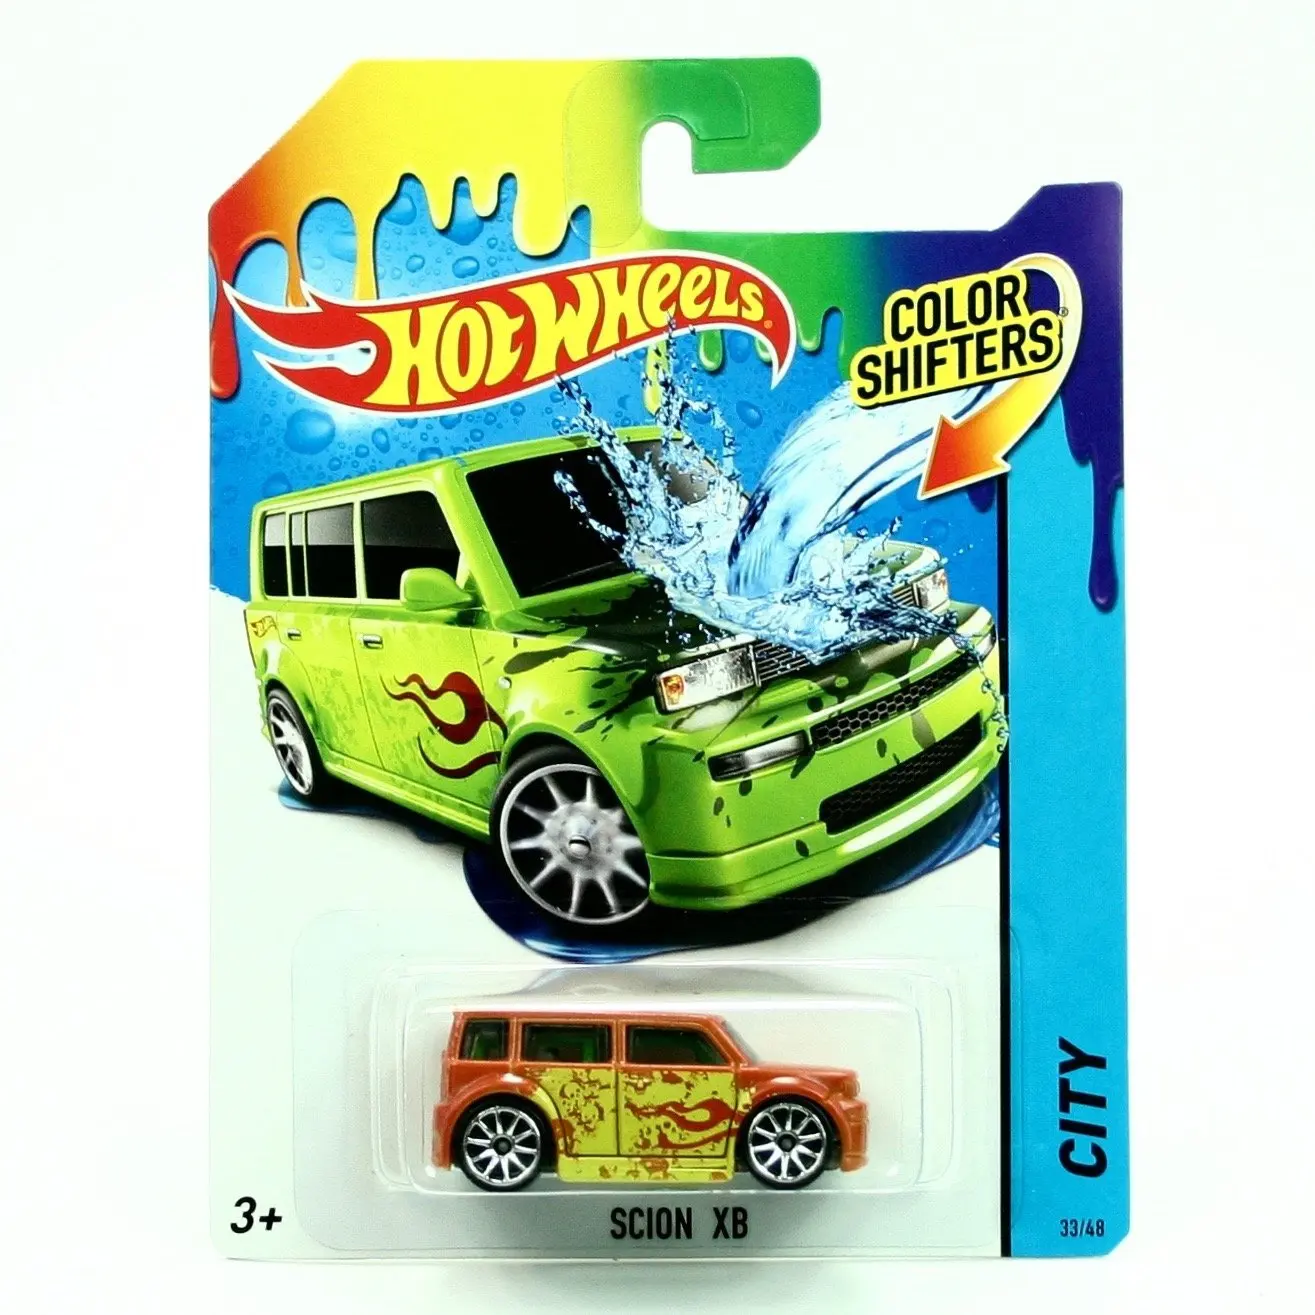 SCION XB * COLOR SHIFTERS * 2014 Hot Wheels City Series 1:64 Scale Vehicle ...